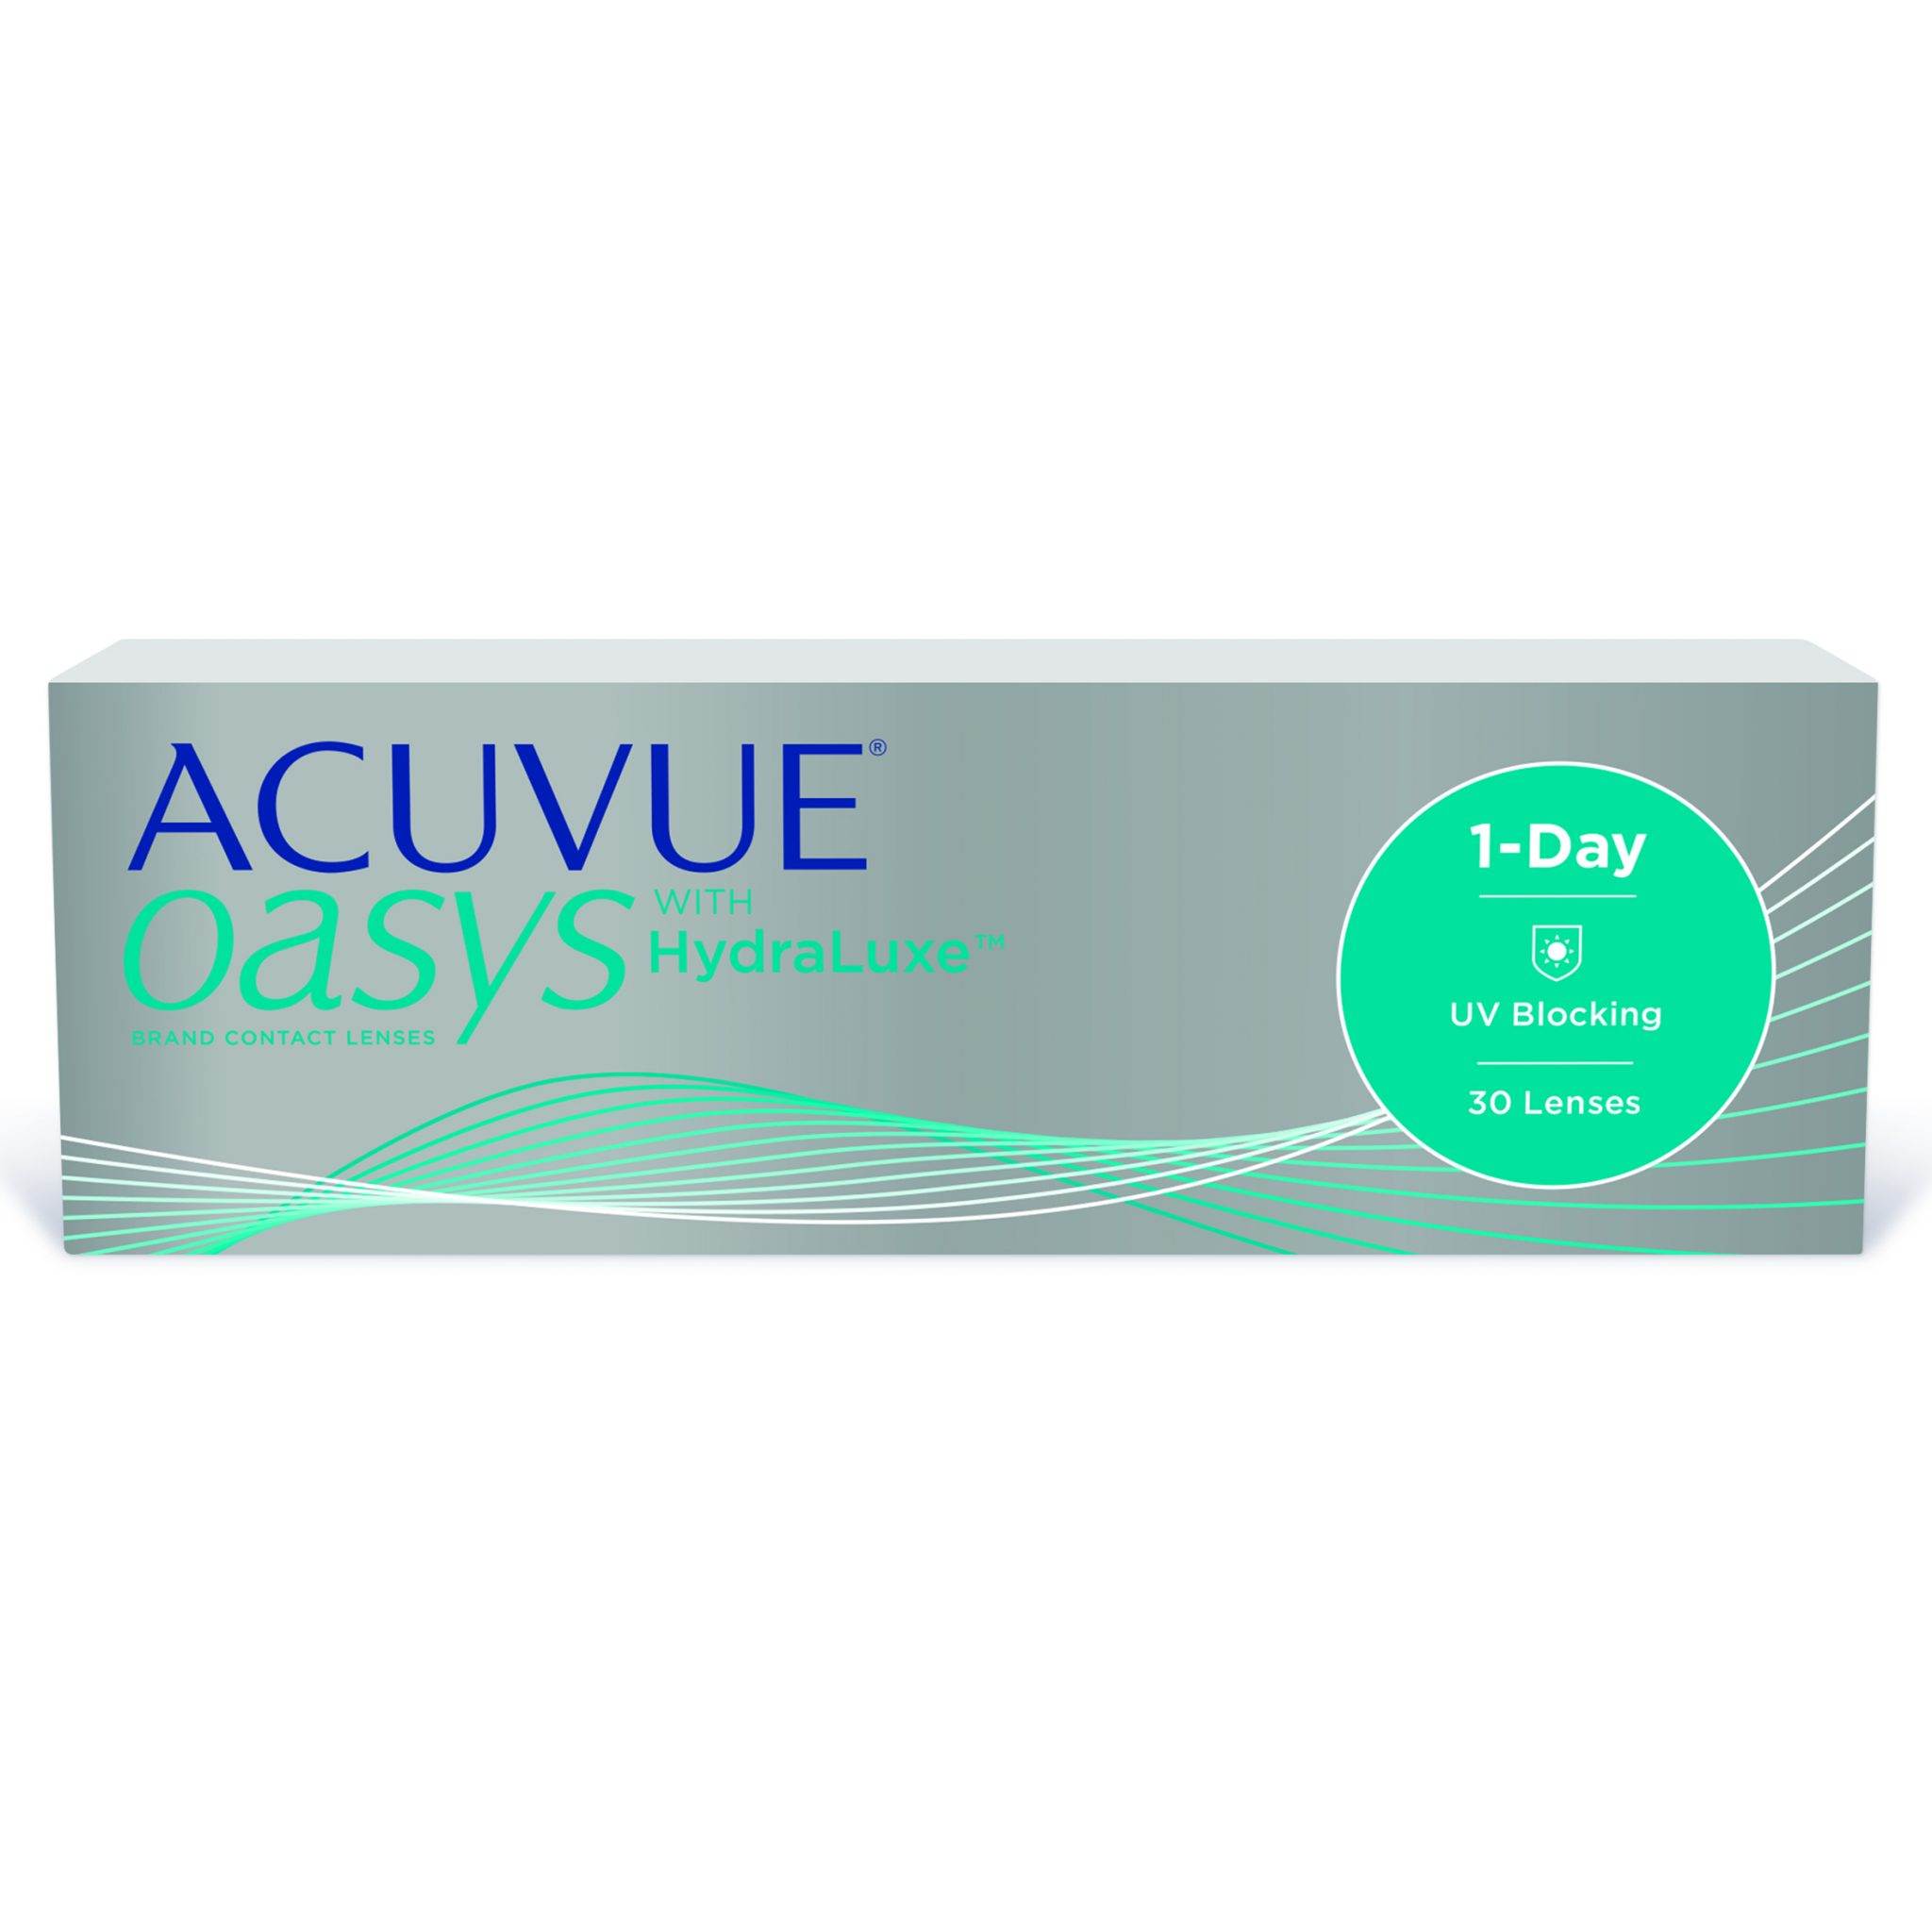 Acuvue Oasys with HydraLuxe(1 day)